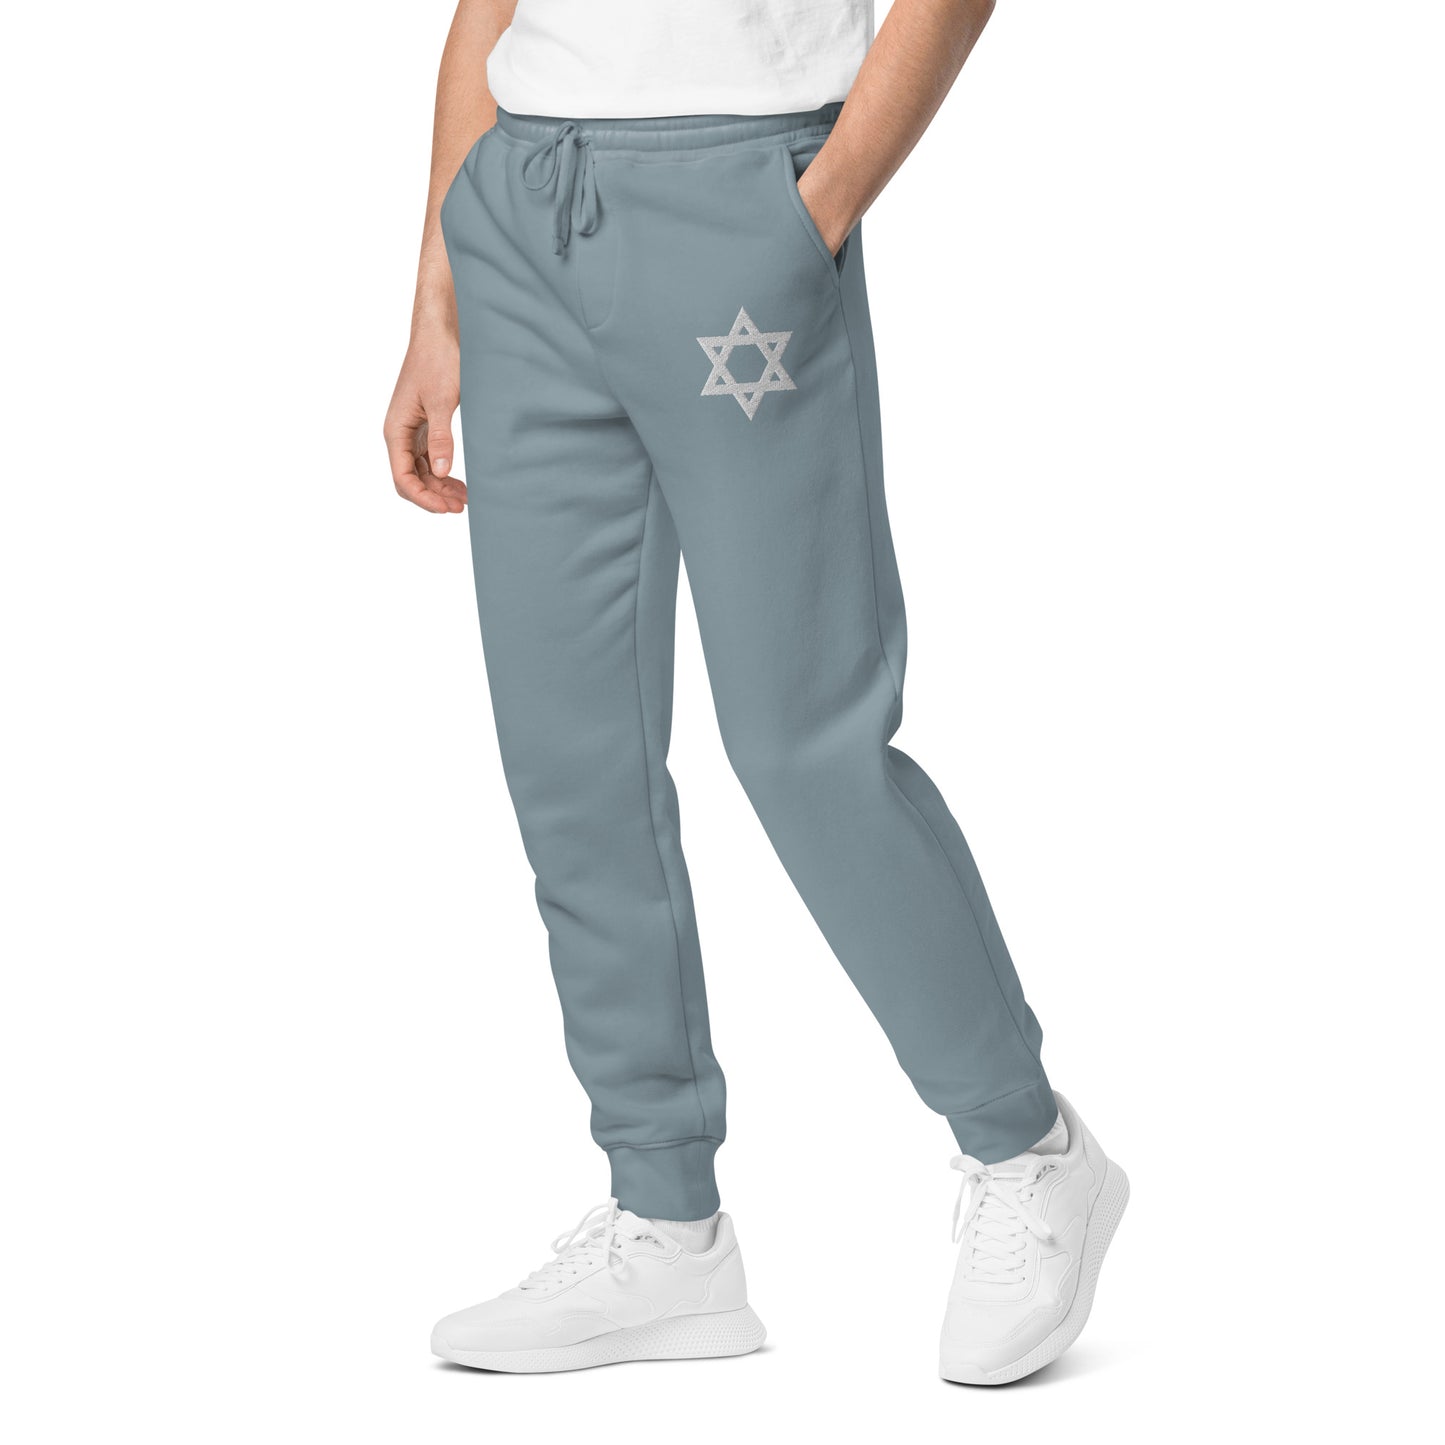 Magen David (Star of David) Embroidered Unisex pigment-dyed sweatpants